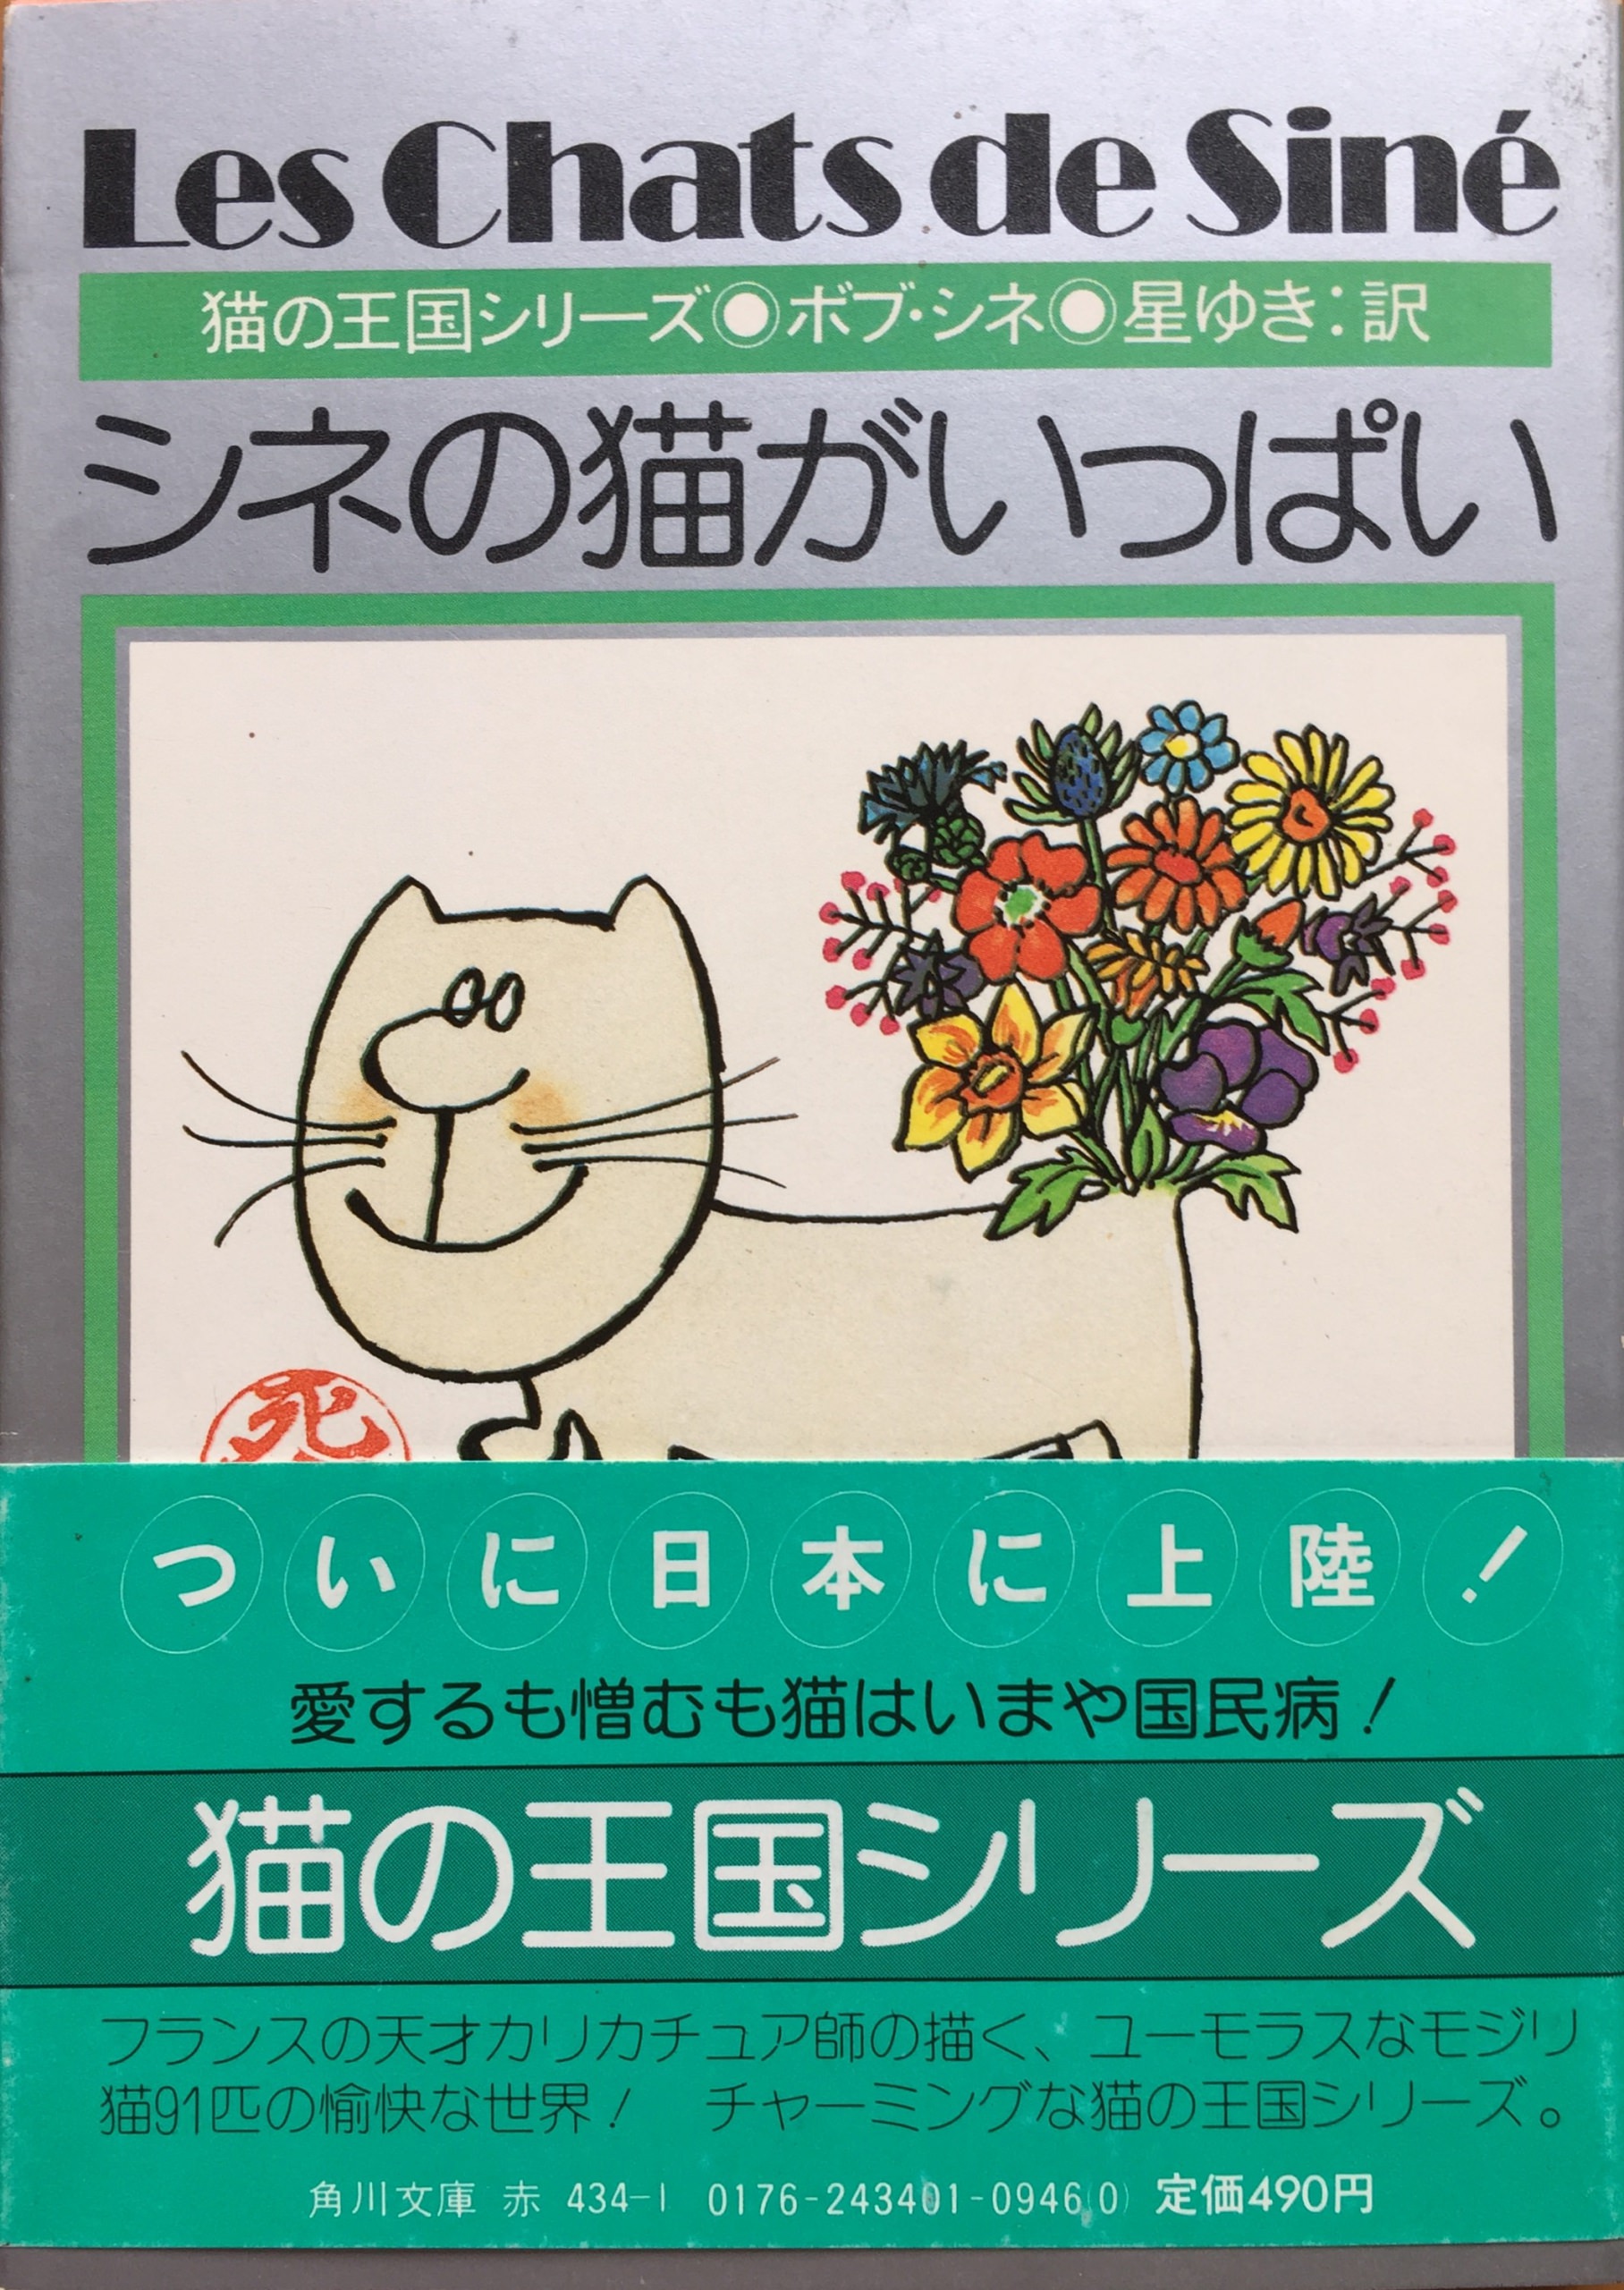 Les chats フランス本 猫120種類解説 新品 - その他